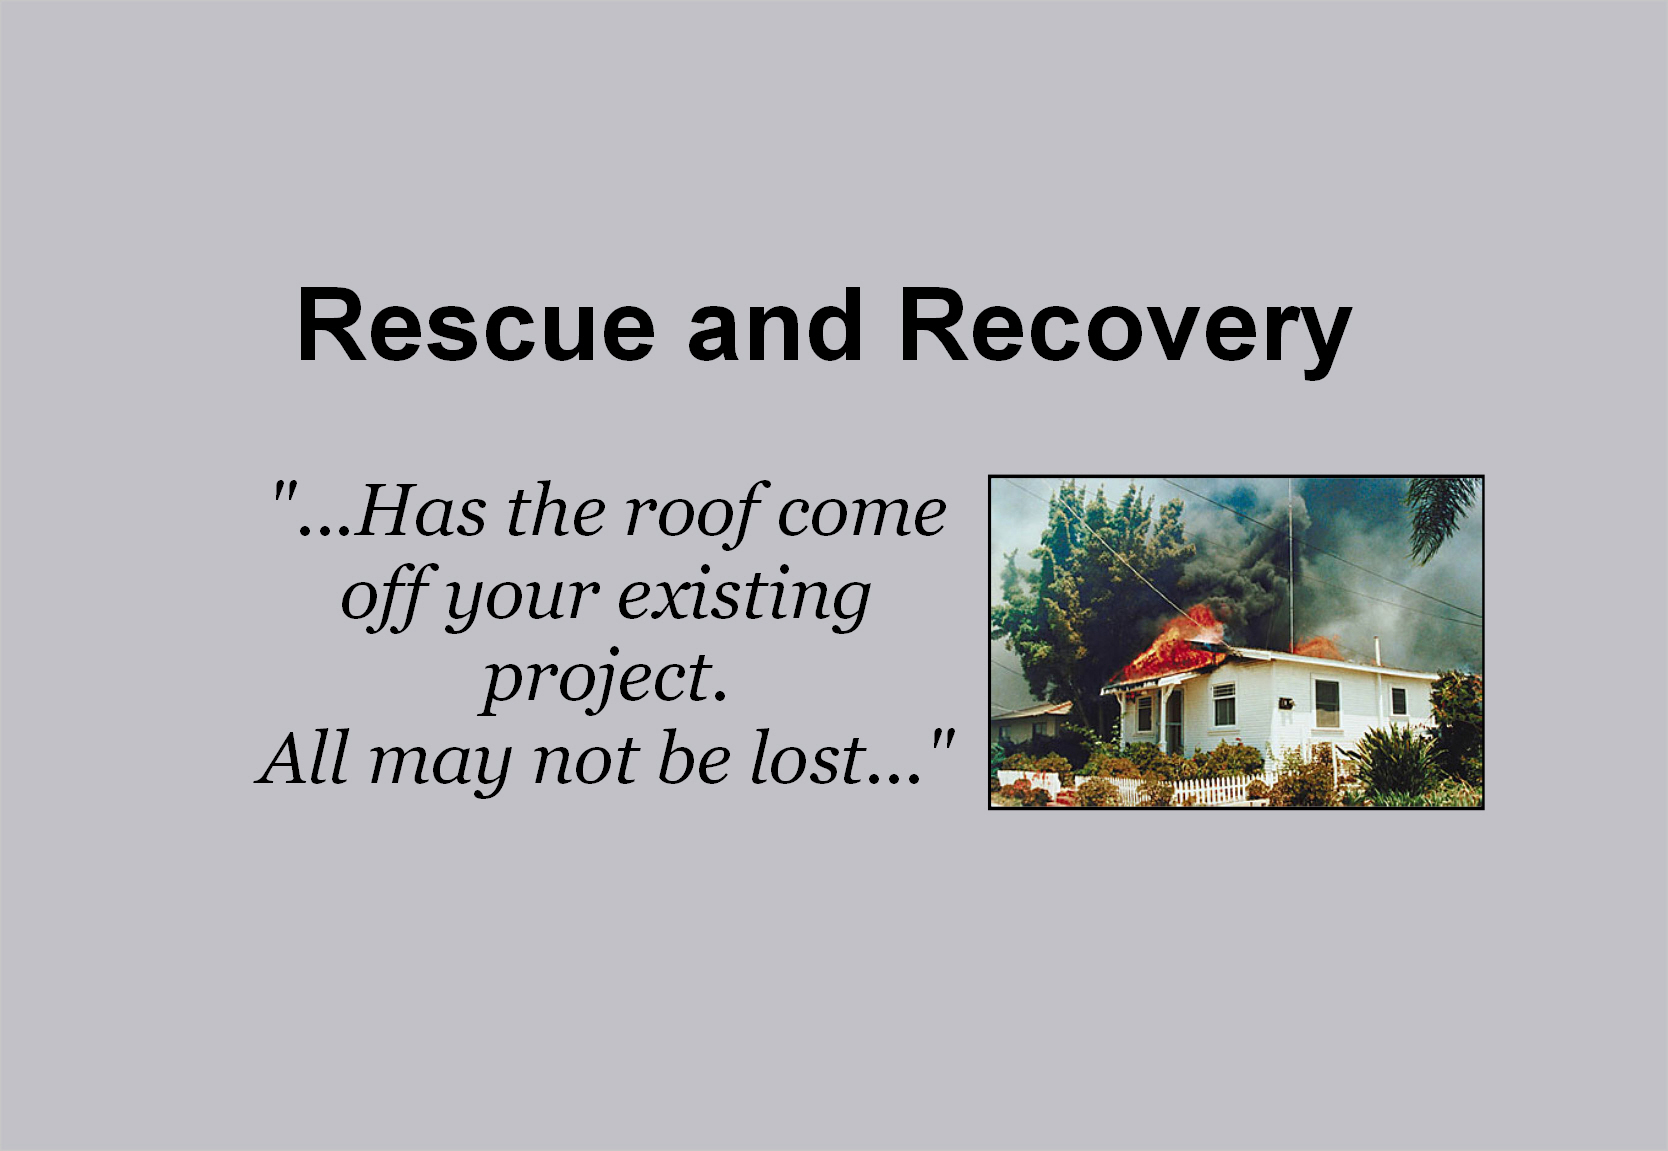 Rescue and Recovery 2